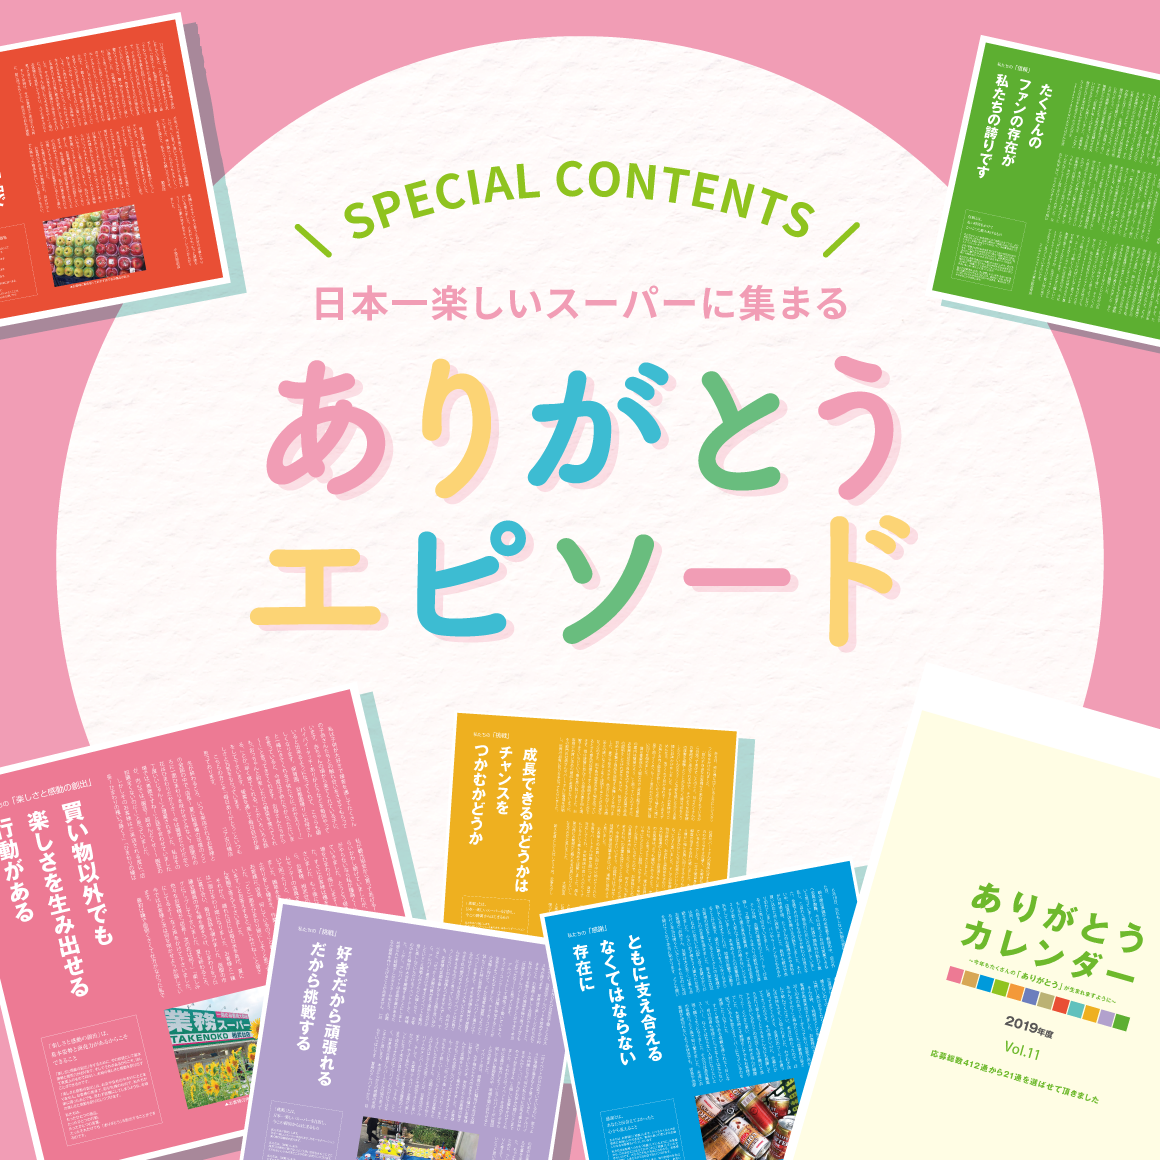 SPECIAL CONTENTS：日本一楽しいスーパーに集まる「ありがとエピソード」